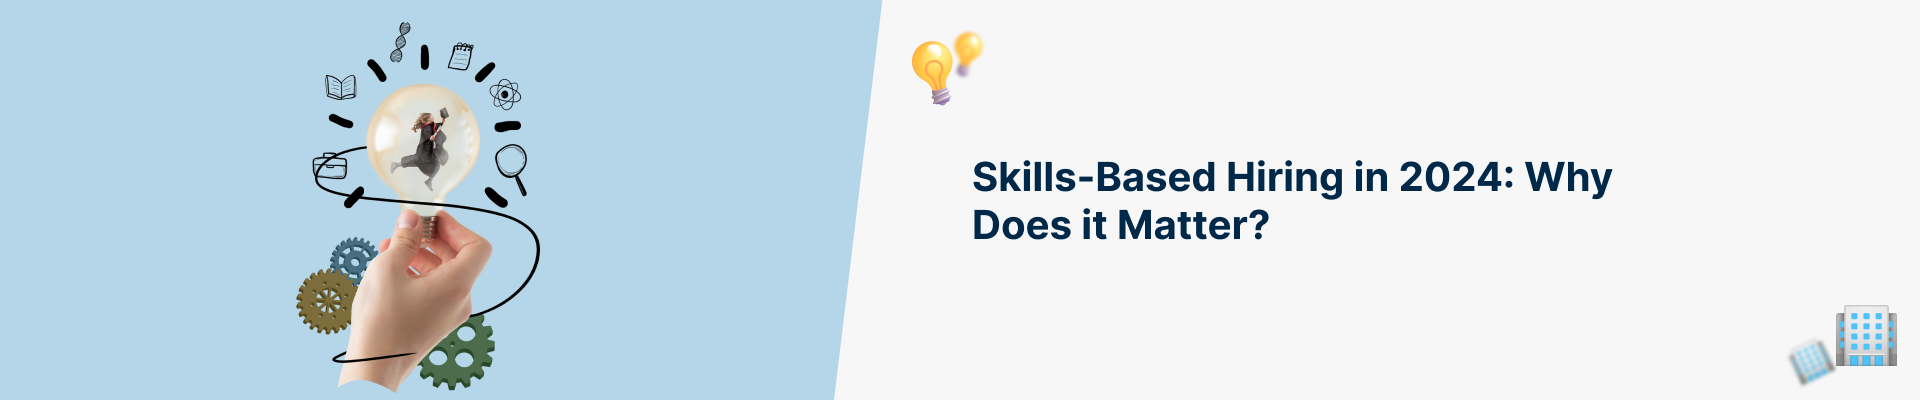 Skills-Based Hiring in 2024 Why Does it Matter